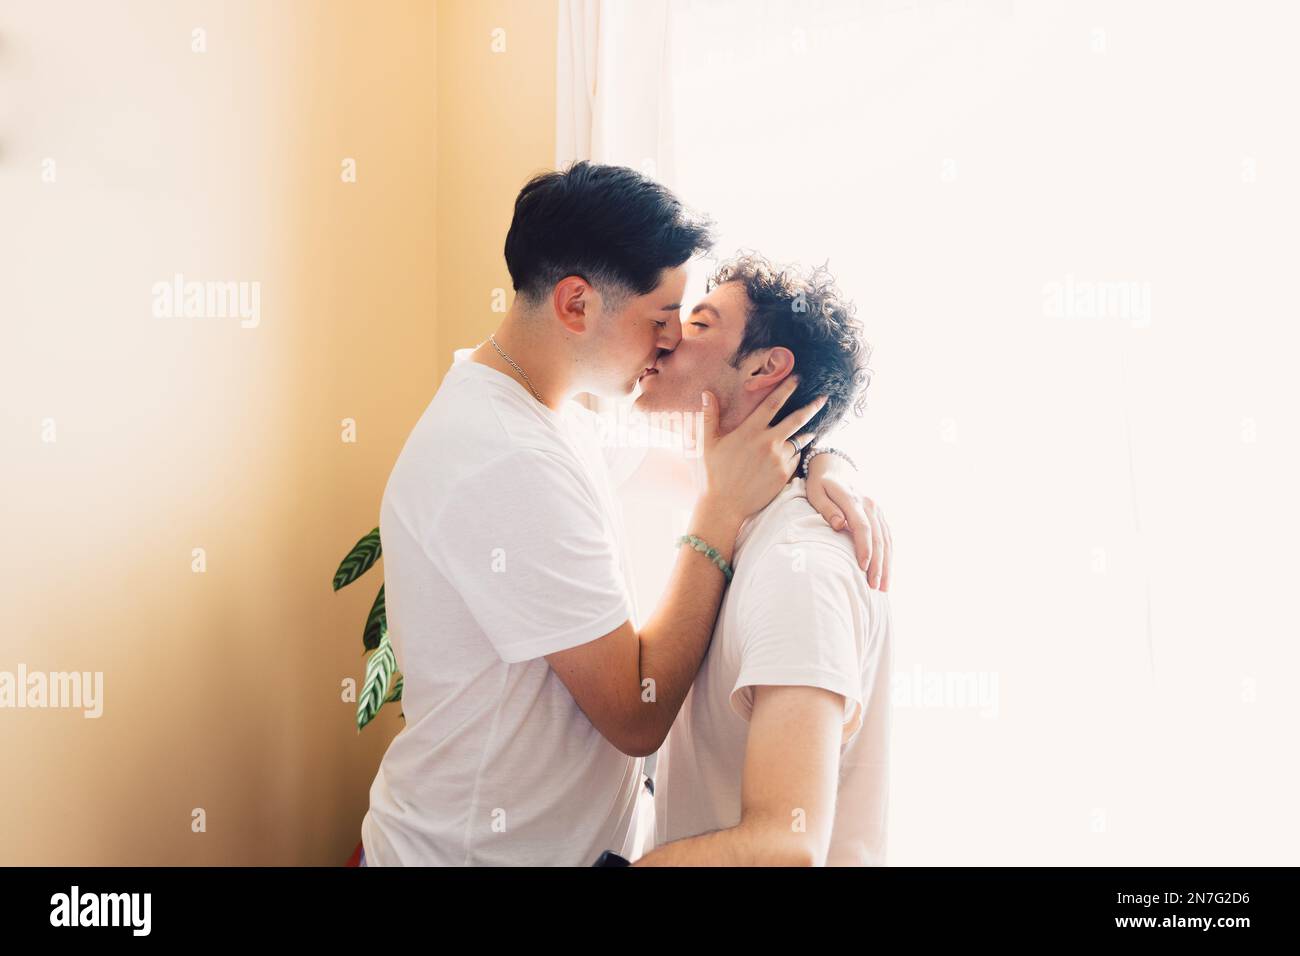 Two gay men wearing white t shirts, romantically kissing on the mouth. LGBT relationship  Stock Photo